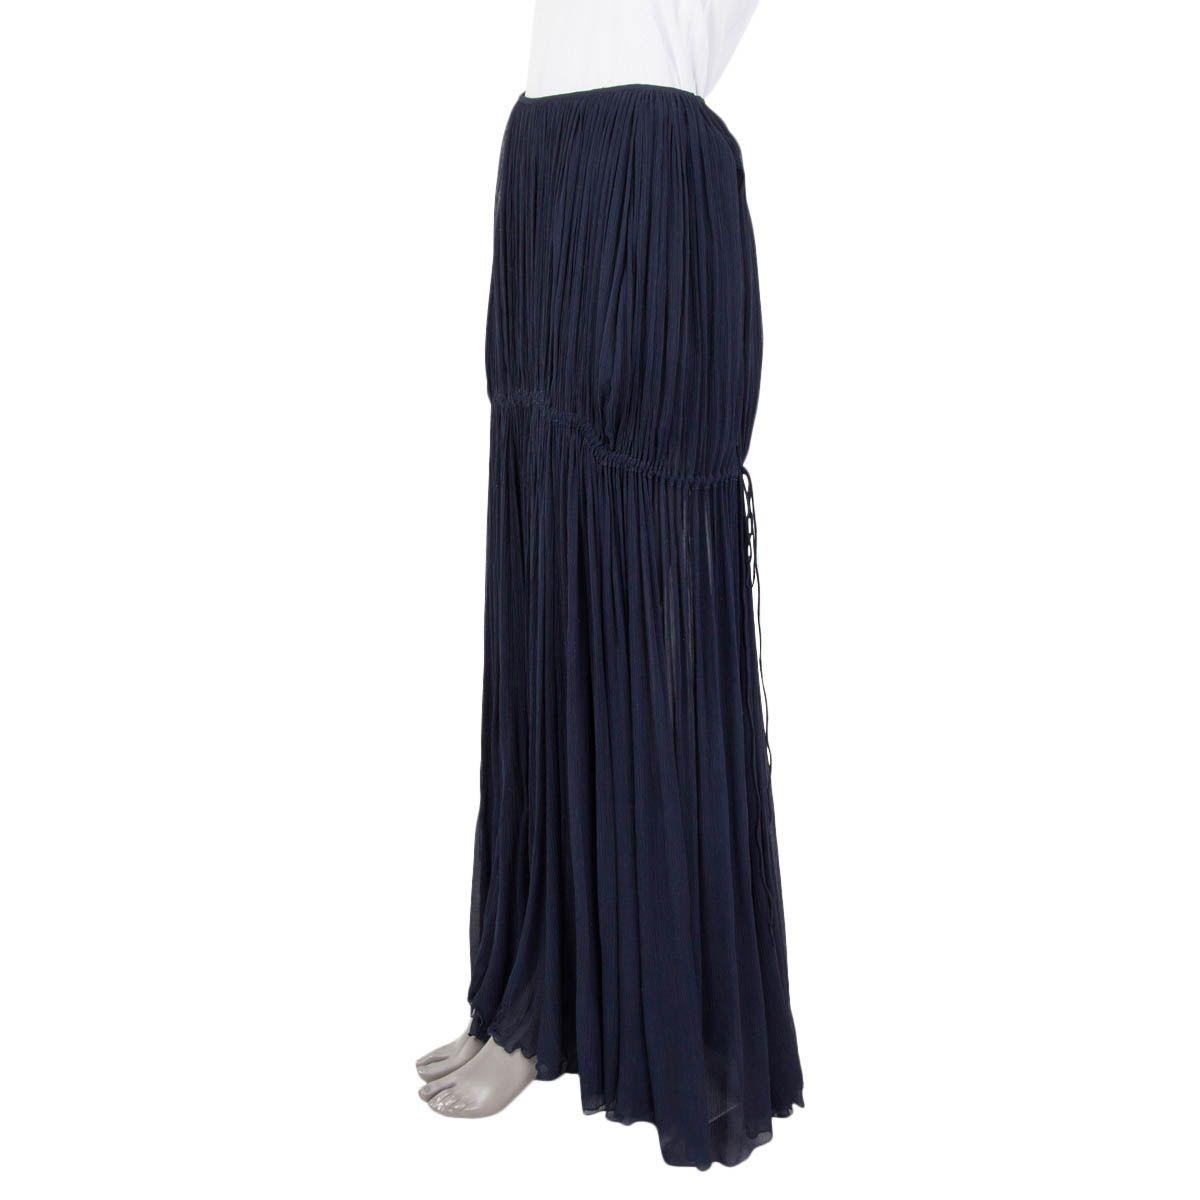 100% authentic Chloé Ruffled Chiffon Maxi Skirt in deep navy silk (100%). Opens with a zipper on the side and is lined with a short mini skirt in deep navy Silk (100%). The flared skirt has an adjustable drawstring detail around the hips. Has been